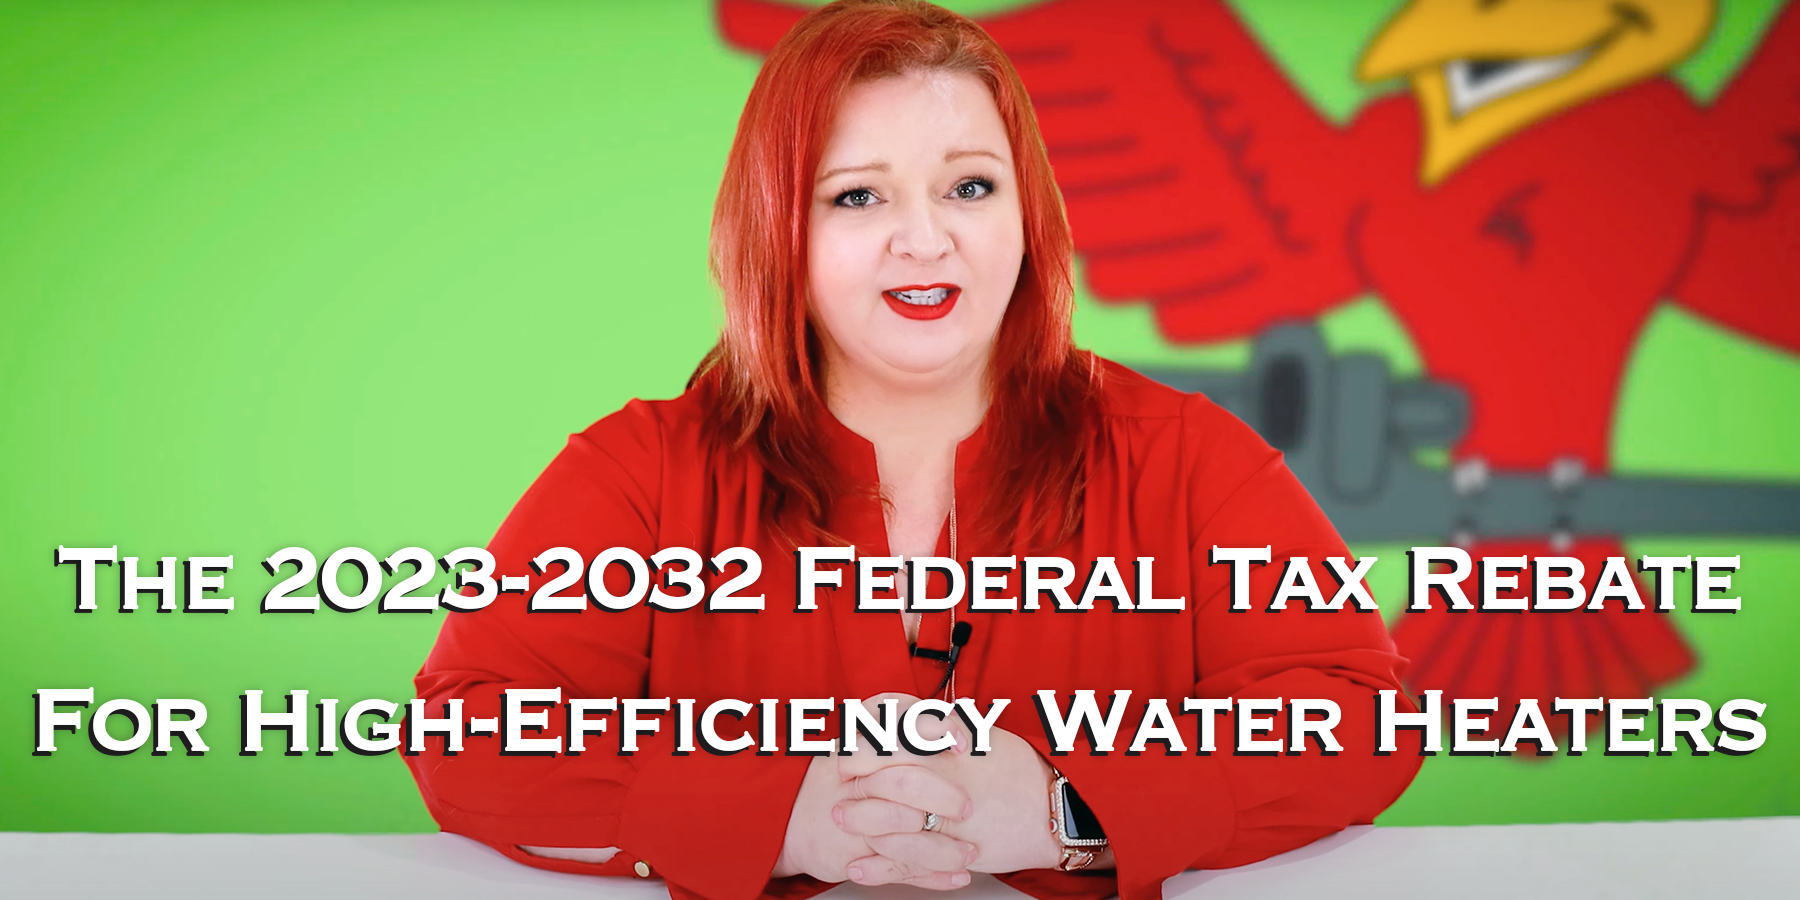 Cover photo for blog "The 2023-2032 Federal Tax Rebate For High-Efficiency Water Heaters "